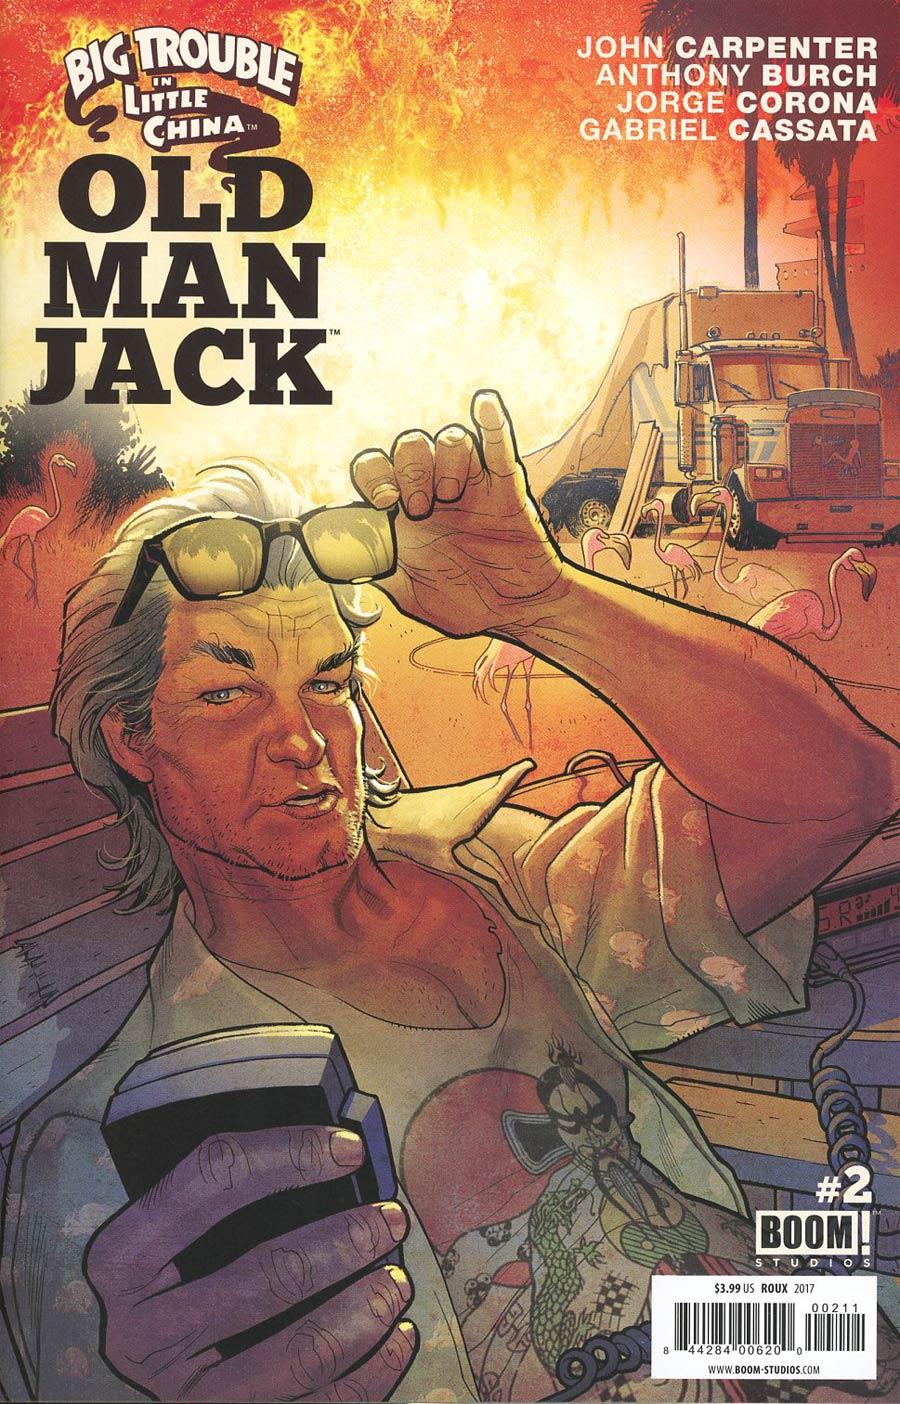 Big Trouble In Little China Old Man Jack Vol. 1 #2